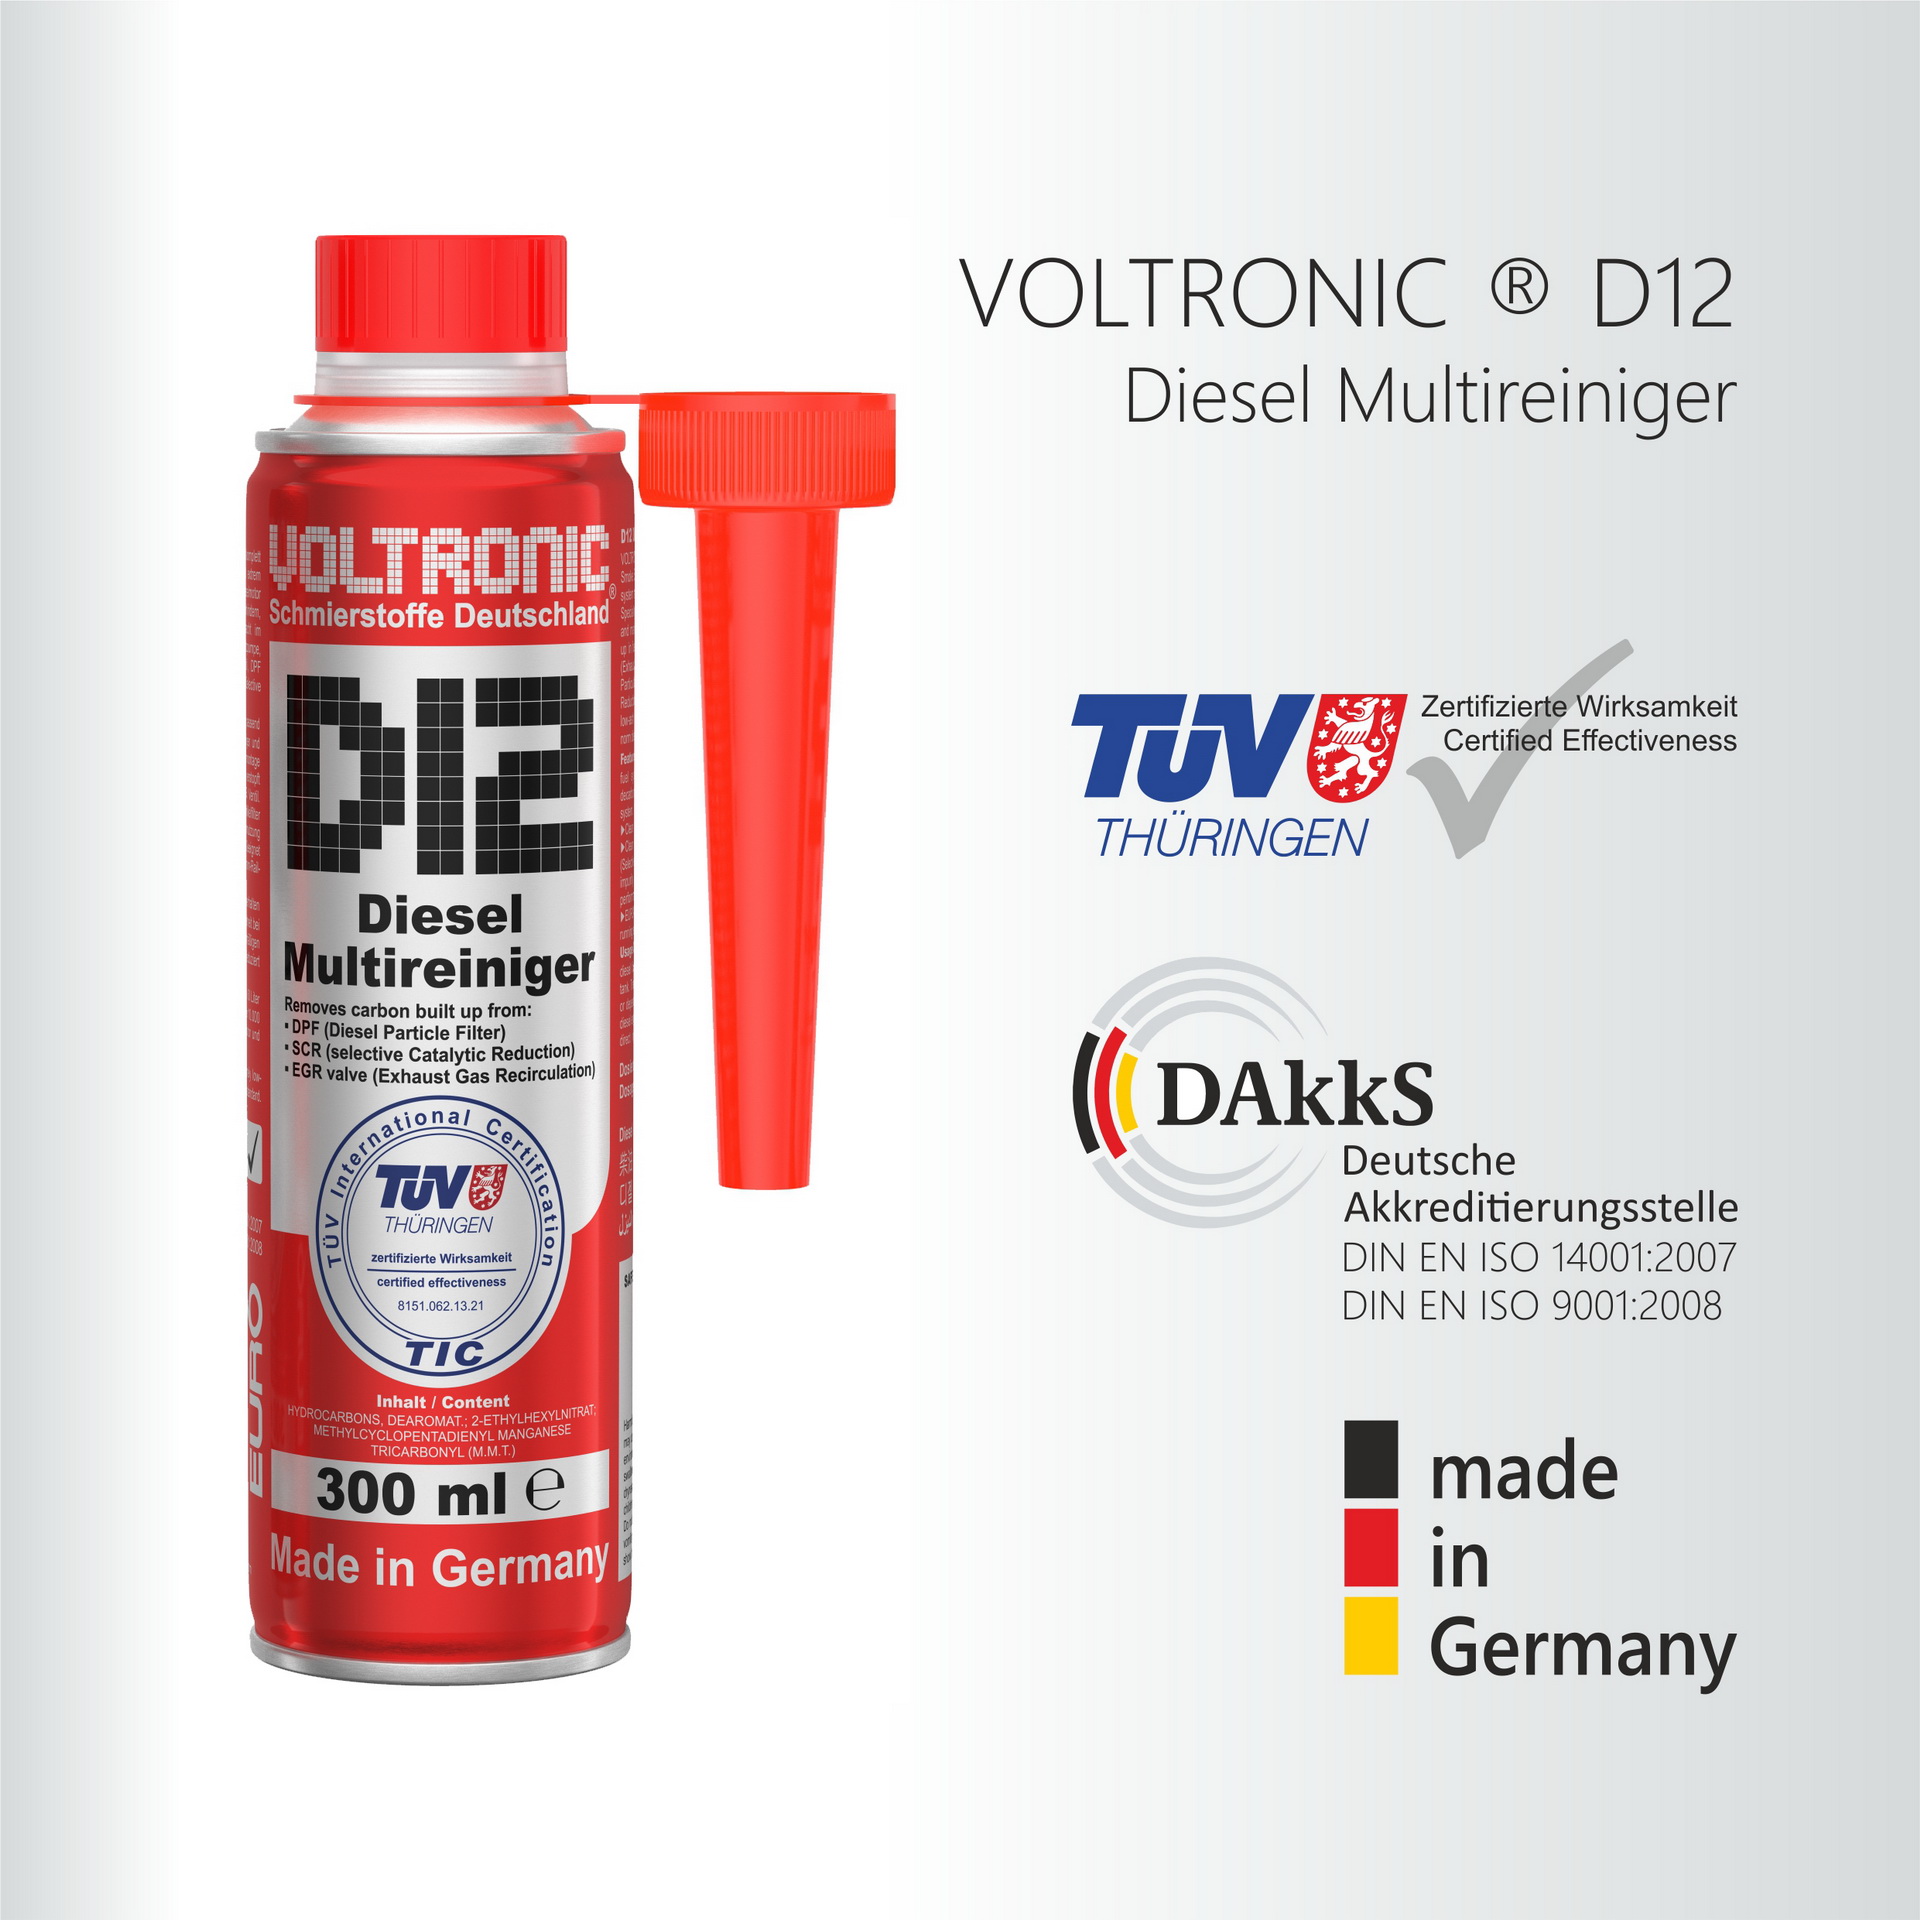 VOLTRONIC® D12 Multi-Reiniger  Lubricant, Motor oil, Additive, ATF, Gear  Oil, Anti-freeze Coolant, Brake Fluid, Car Care and Chemical, Made in  Germany.